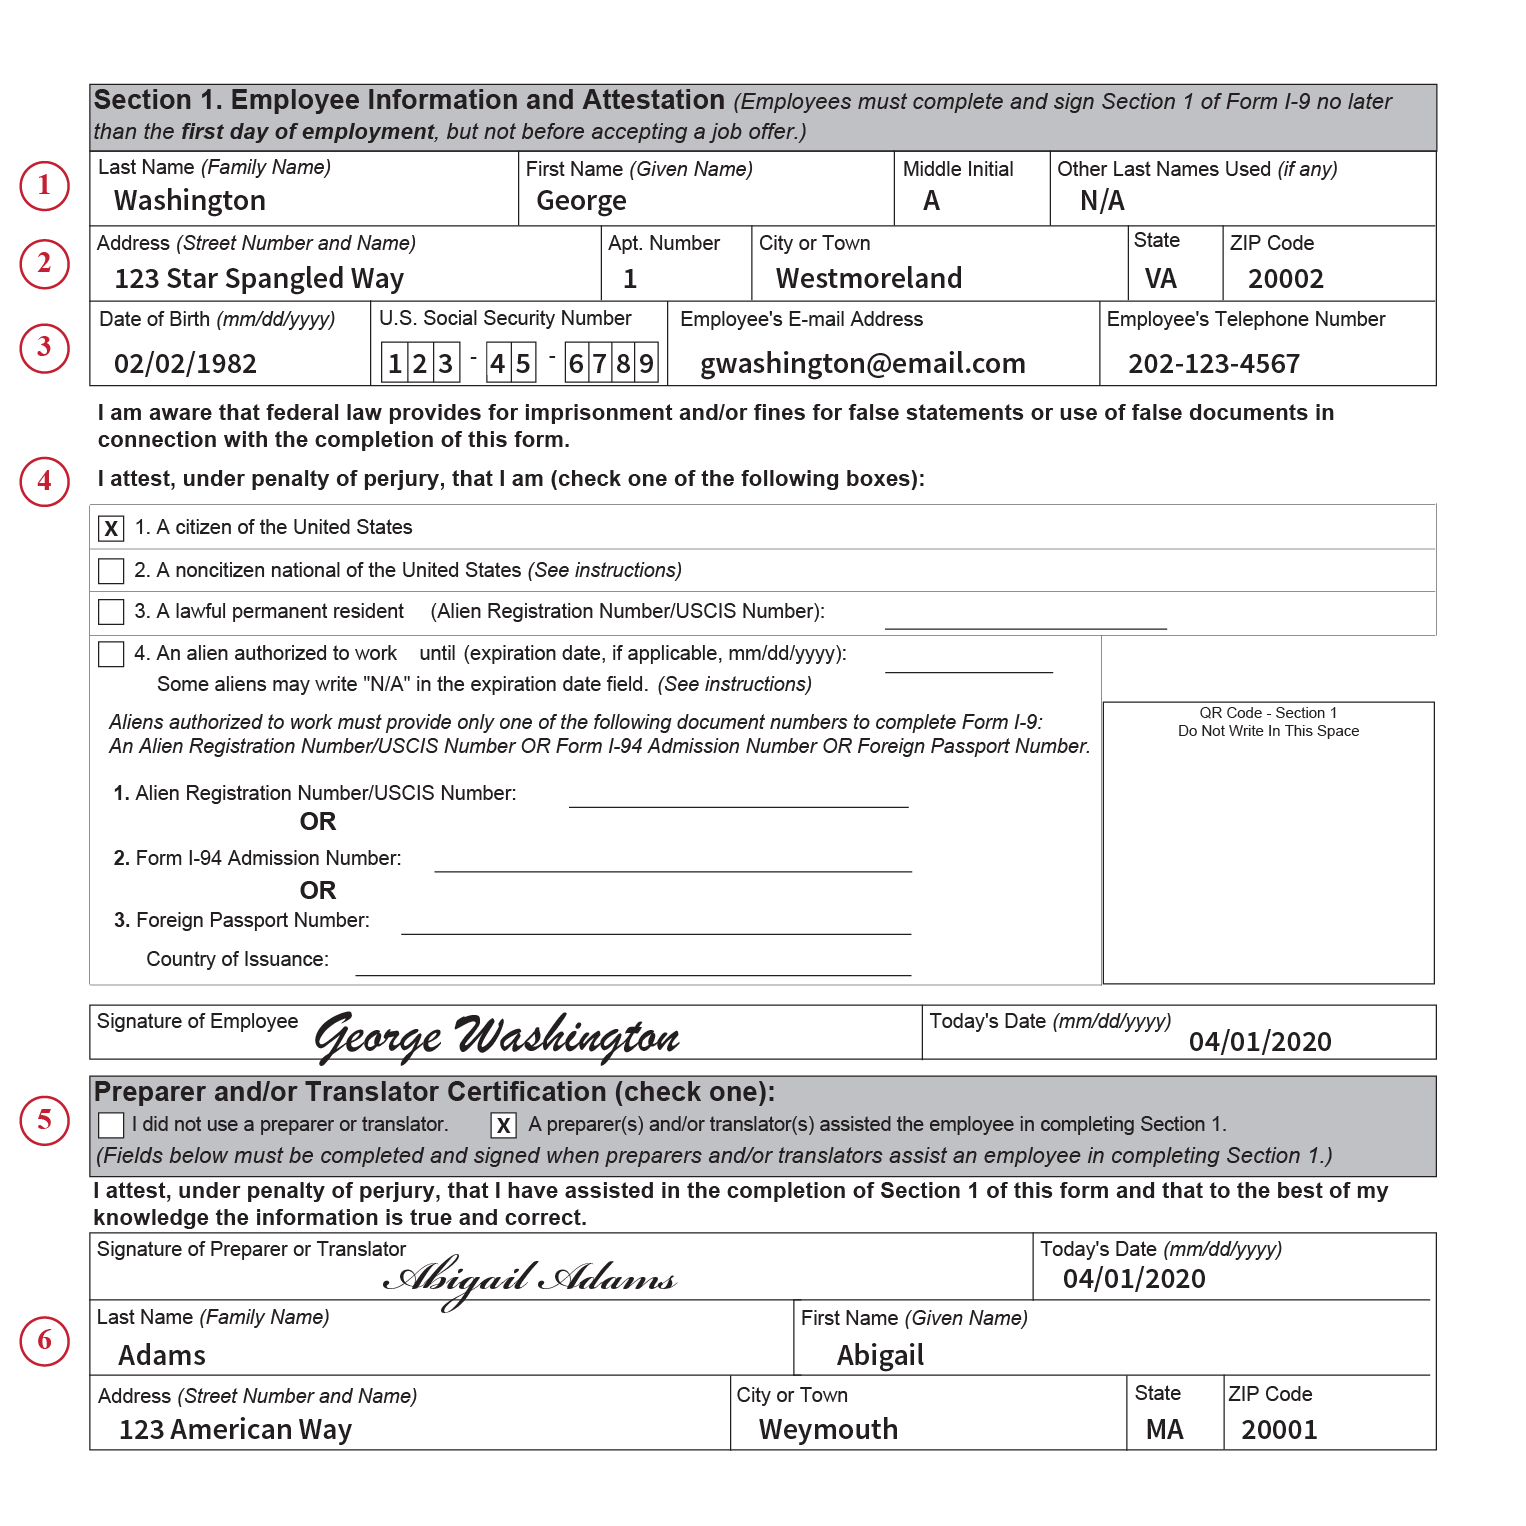 What Is Form I-9 And How To Stay Compliant With I-9? with I-9 Form Requirements